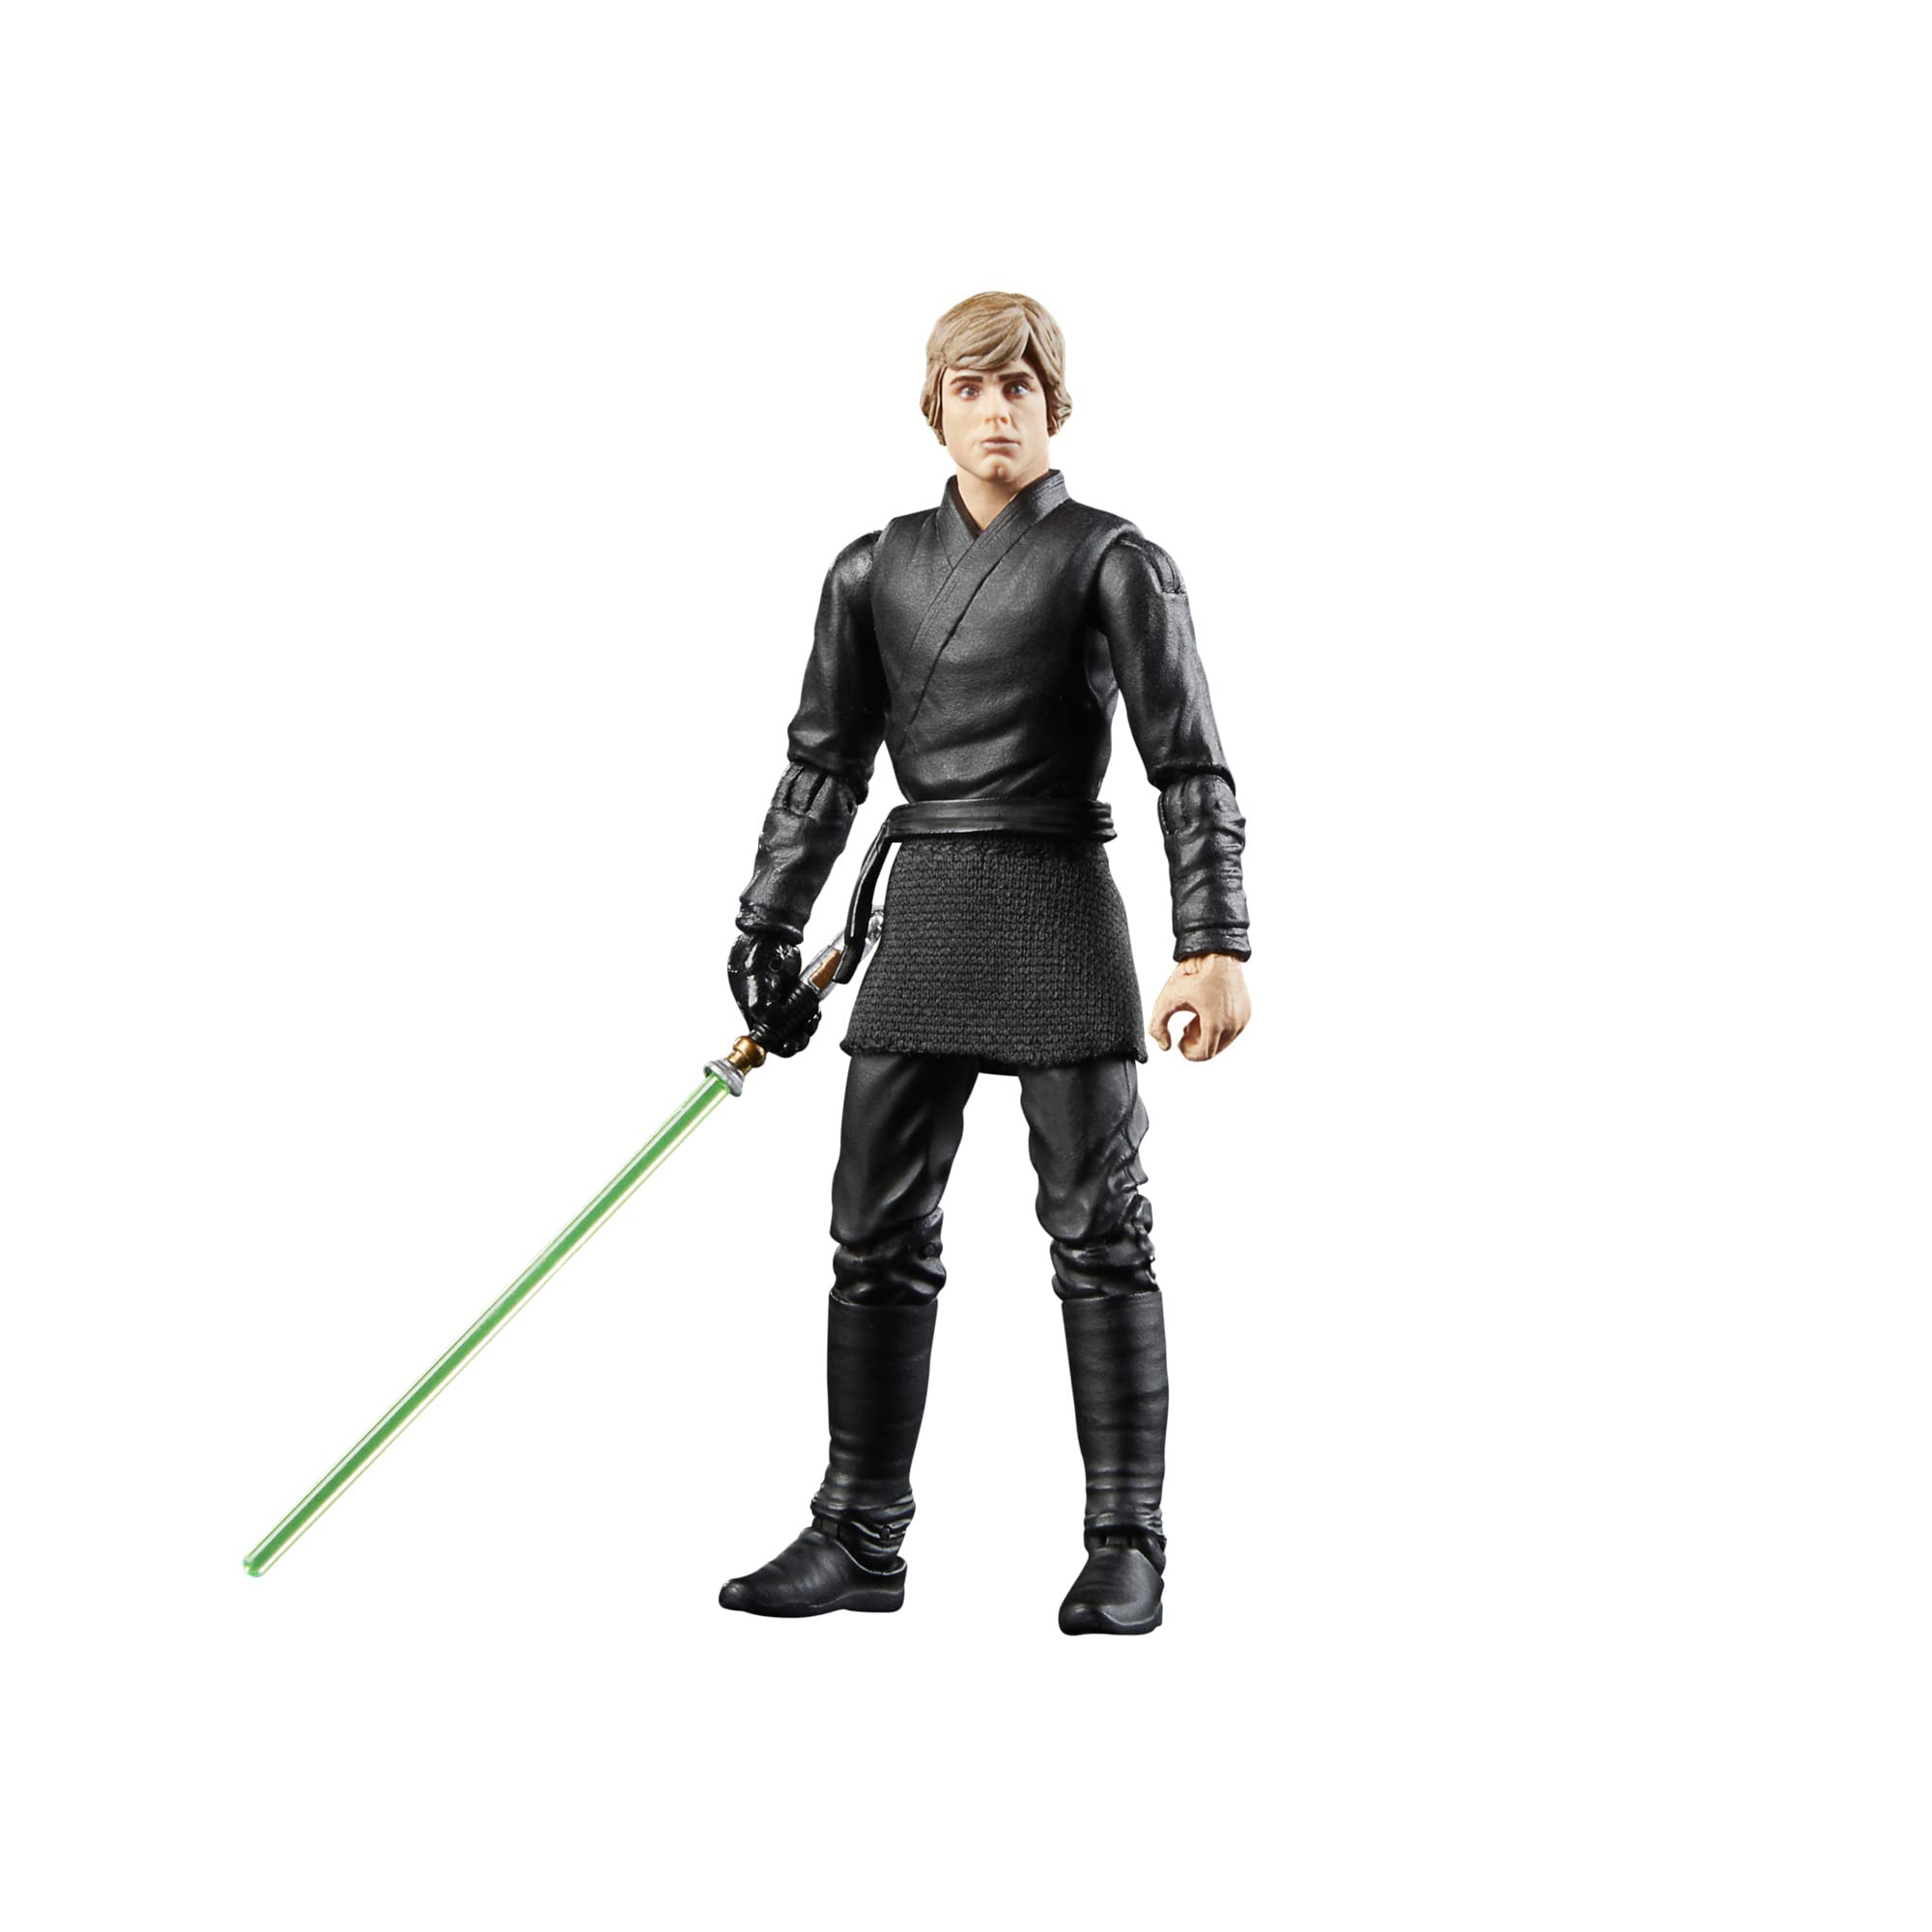 STAR WARS The Vintage Collection Luke Skywalker (Jedi Academy), The Book of Boba Fett 3.75-Inch Collectible Action Figures, Ages 4 and Up